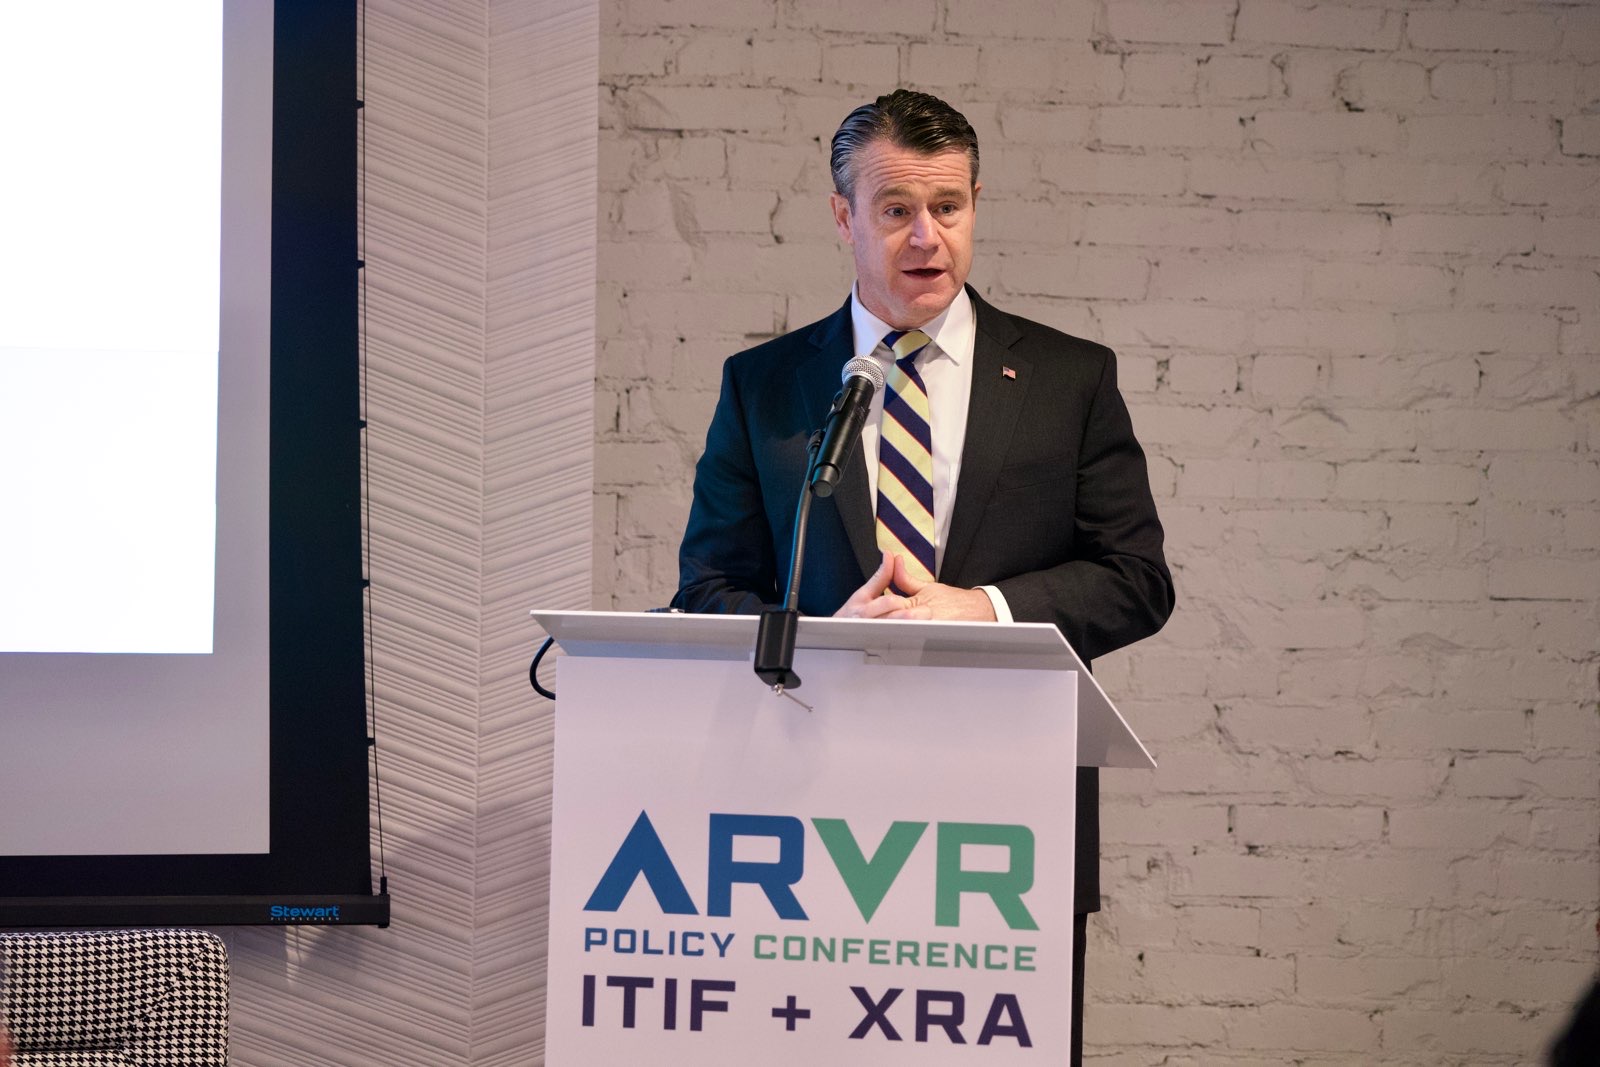 THE XR ASSOCIATION DIVES INTO KEY XR POLICY ISSUES, HIGHLIGHTS MEMBER COMPANIES AT THIRD ANNUAL AR/VR POLICY CONFERENCE IN WASHINGTON, DC